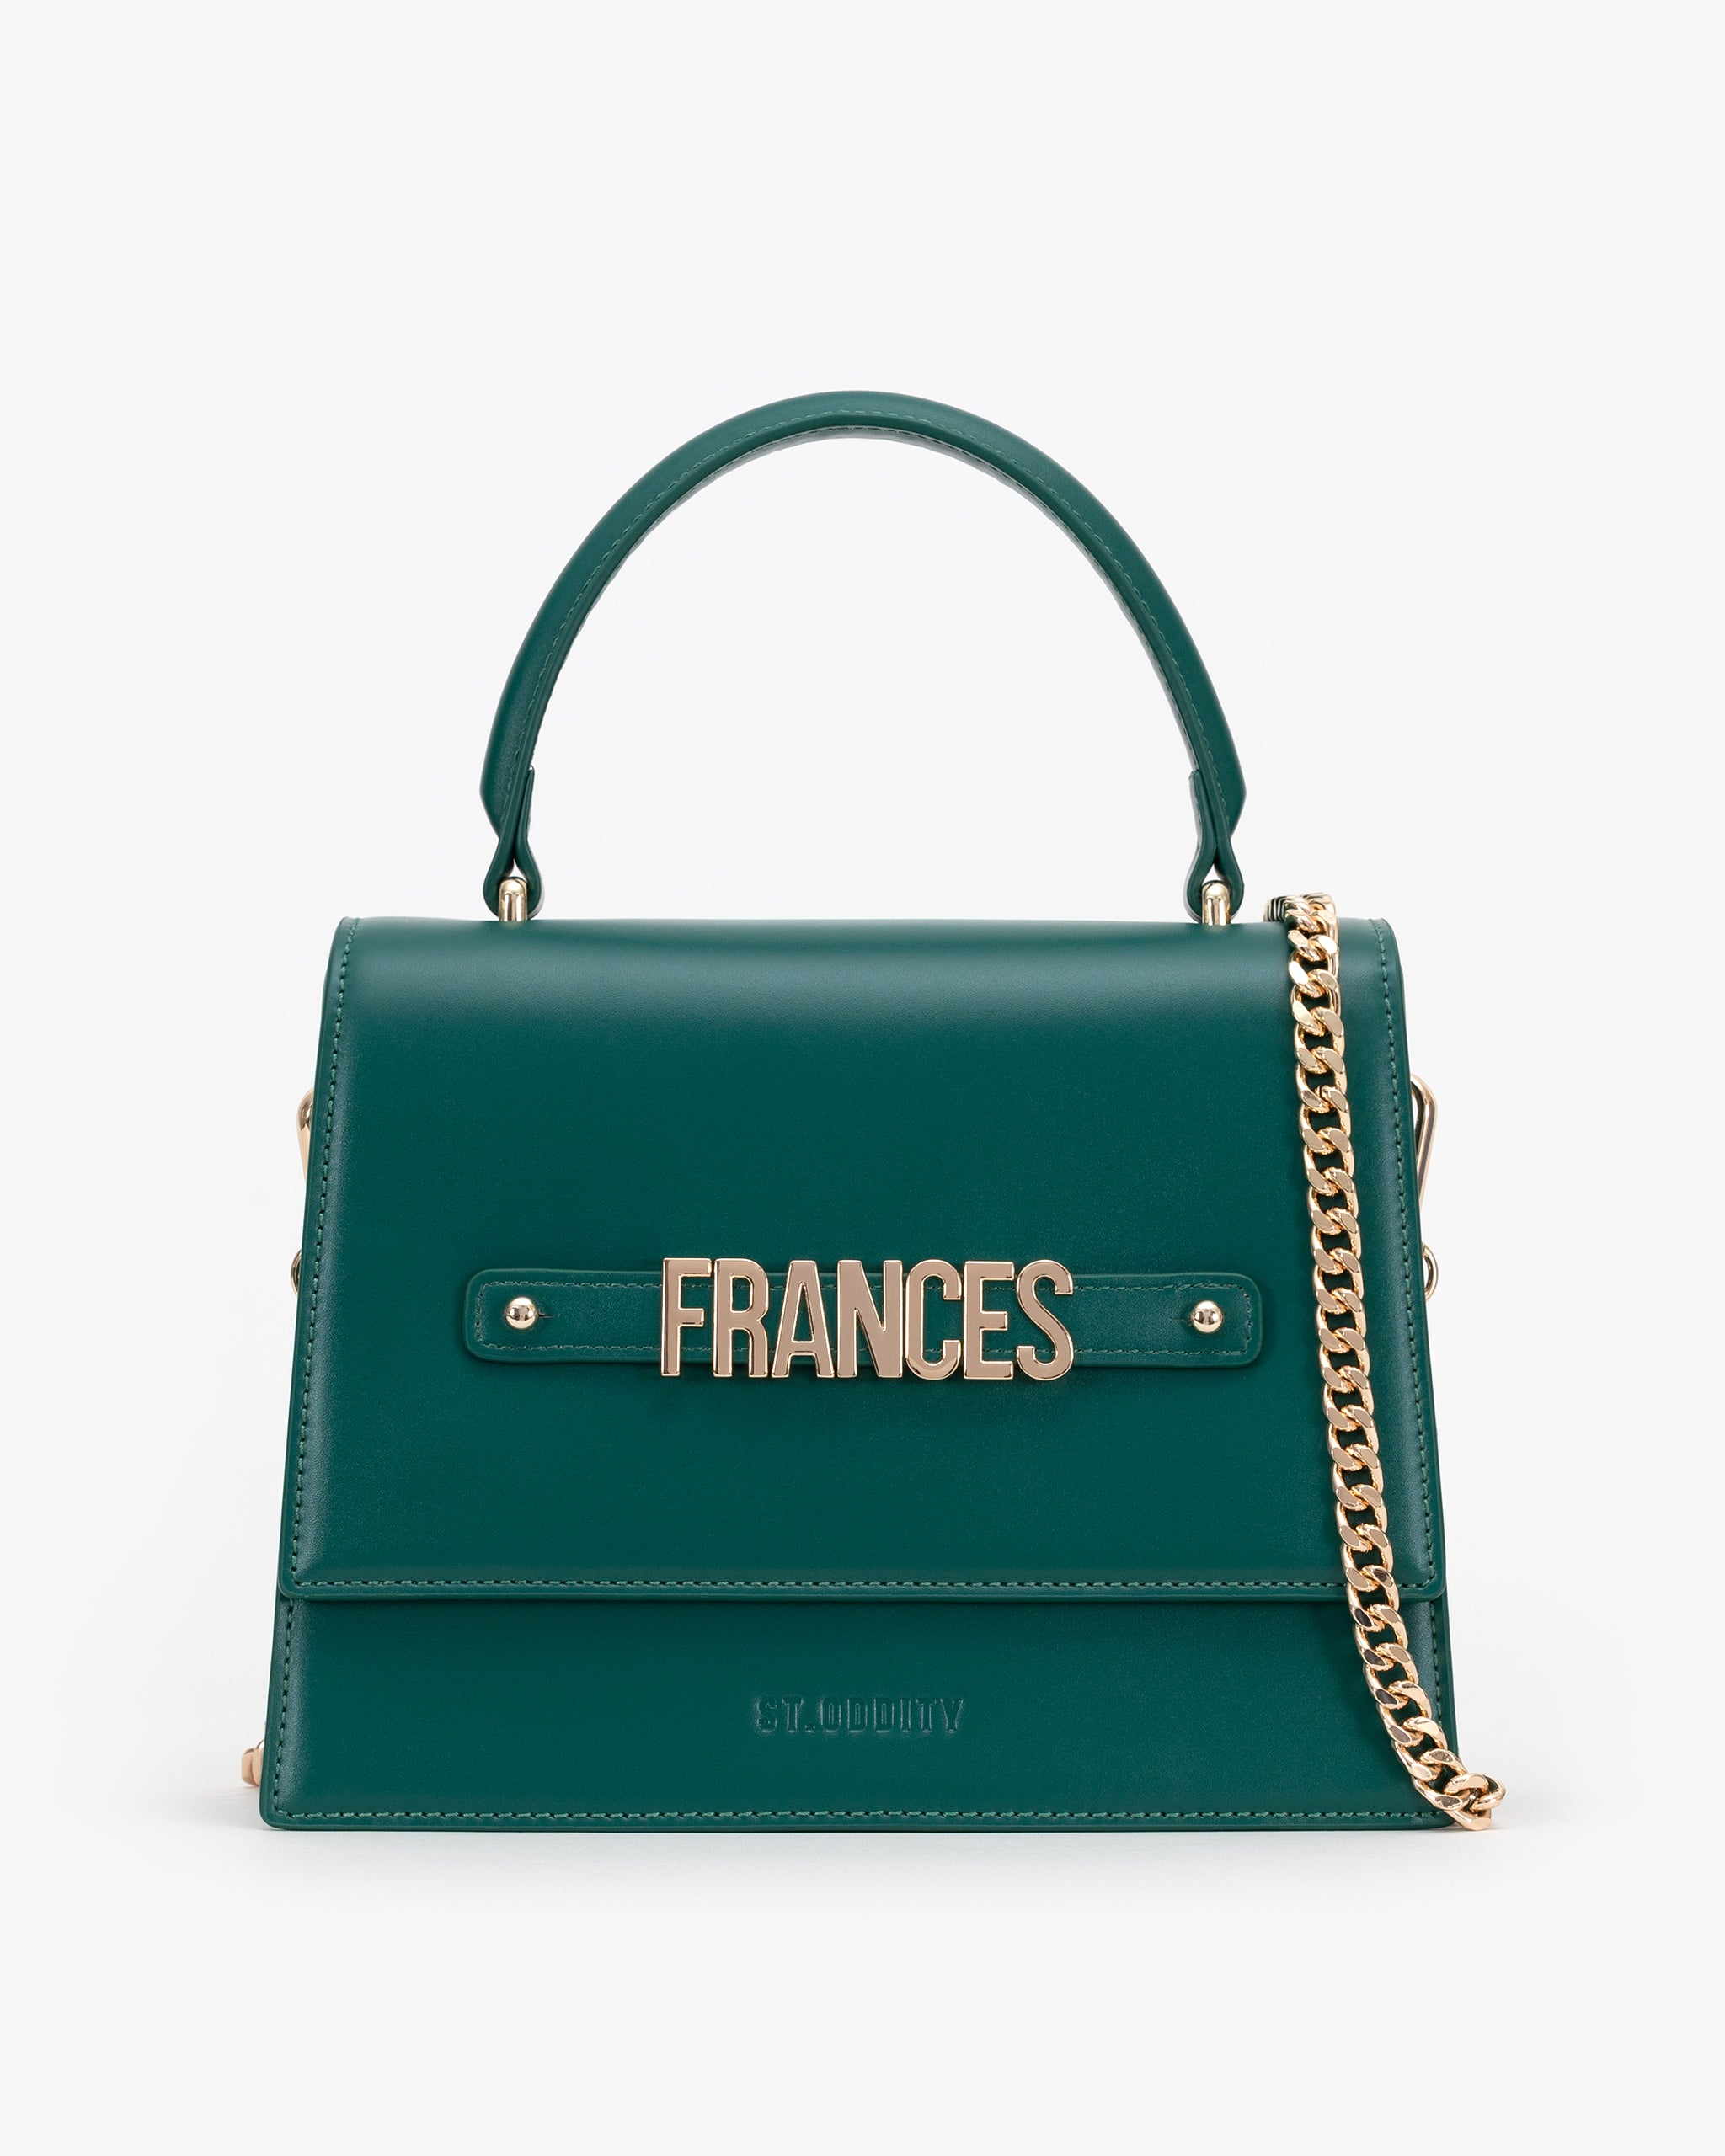 Pre-order (Mid-May): Large Evening Bag in Emerald Green with Personalised Hardware